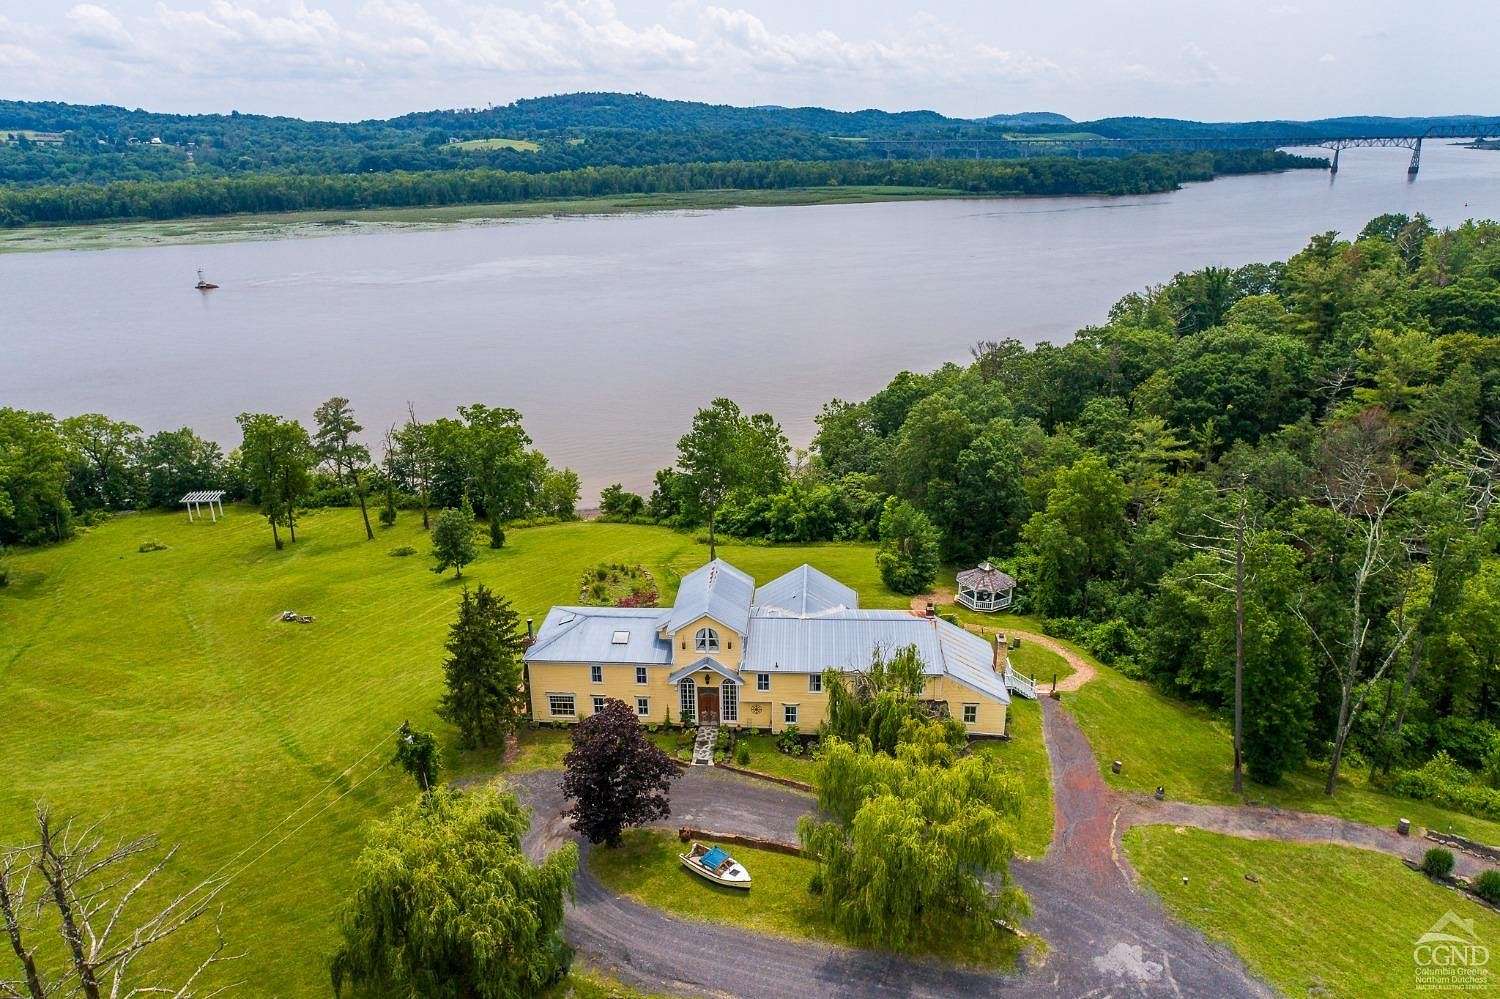 85 Acres of Land for Sale in Catskill, New York